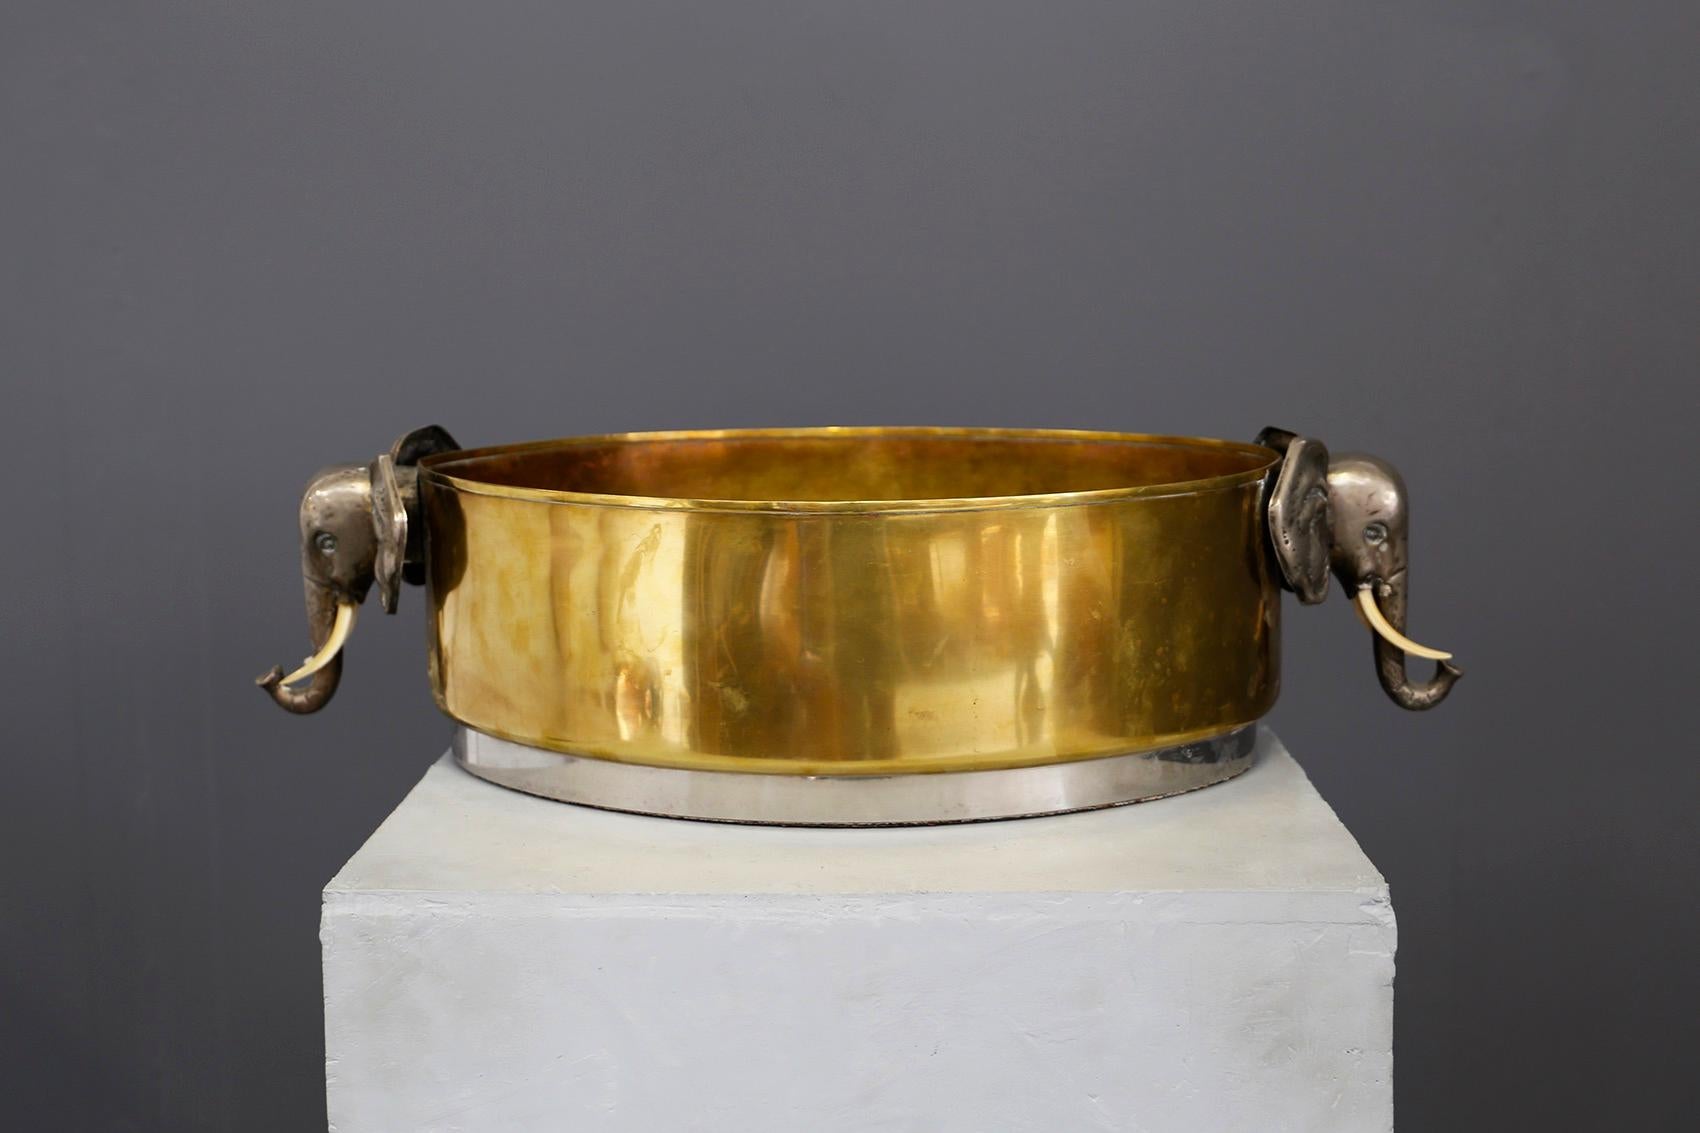 Elegant ice holder for Champagne in brass from the 1970s. The container is made of brass and chromium-plated steel. At both ends we find two figures carved in brass of two elephants. In the base we find a chromium-plated steel border. Given its